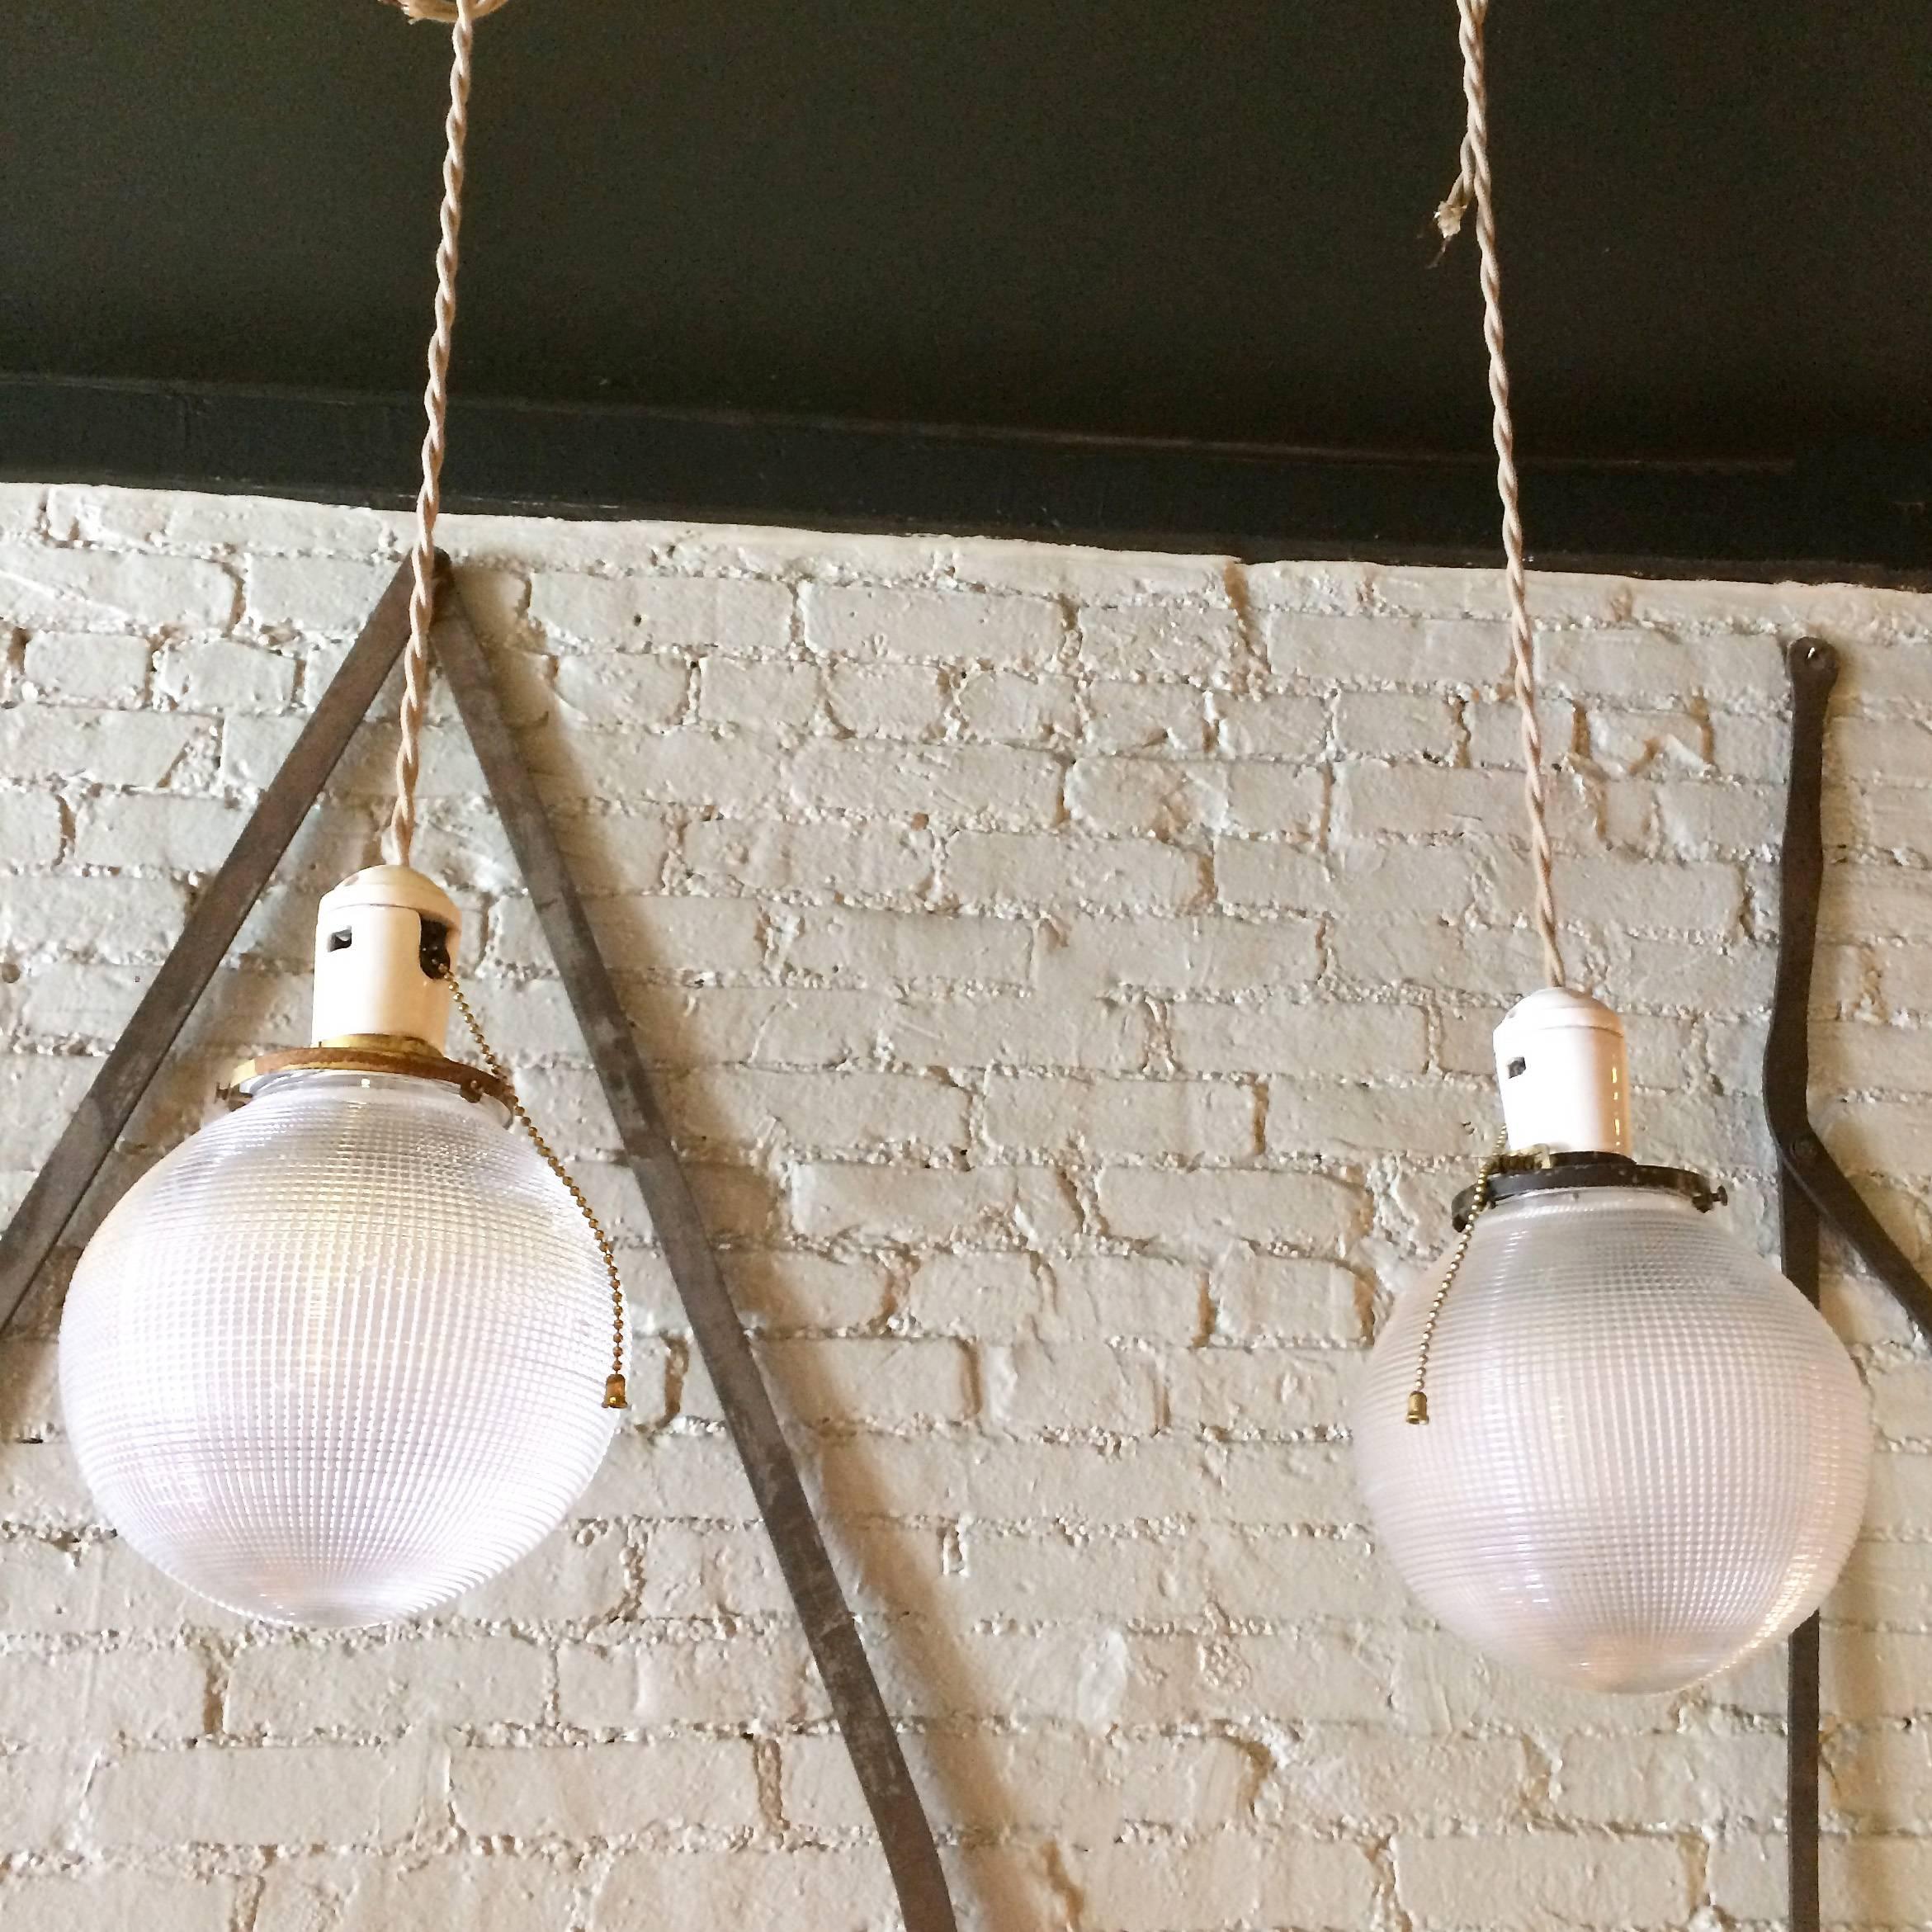 Pair of Industrial, Holophane glass, globe pendant lights feature porcelain sockets with pull chains and brass fitters are newly wired with 52in. of beige braided cord and can accept up to 150 watt bulbs.

The shade is 6.5in. diameter.